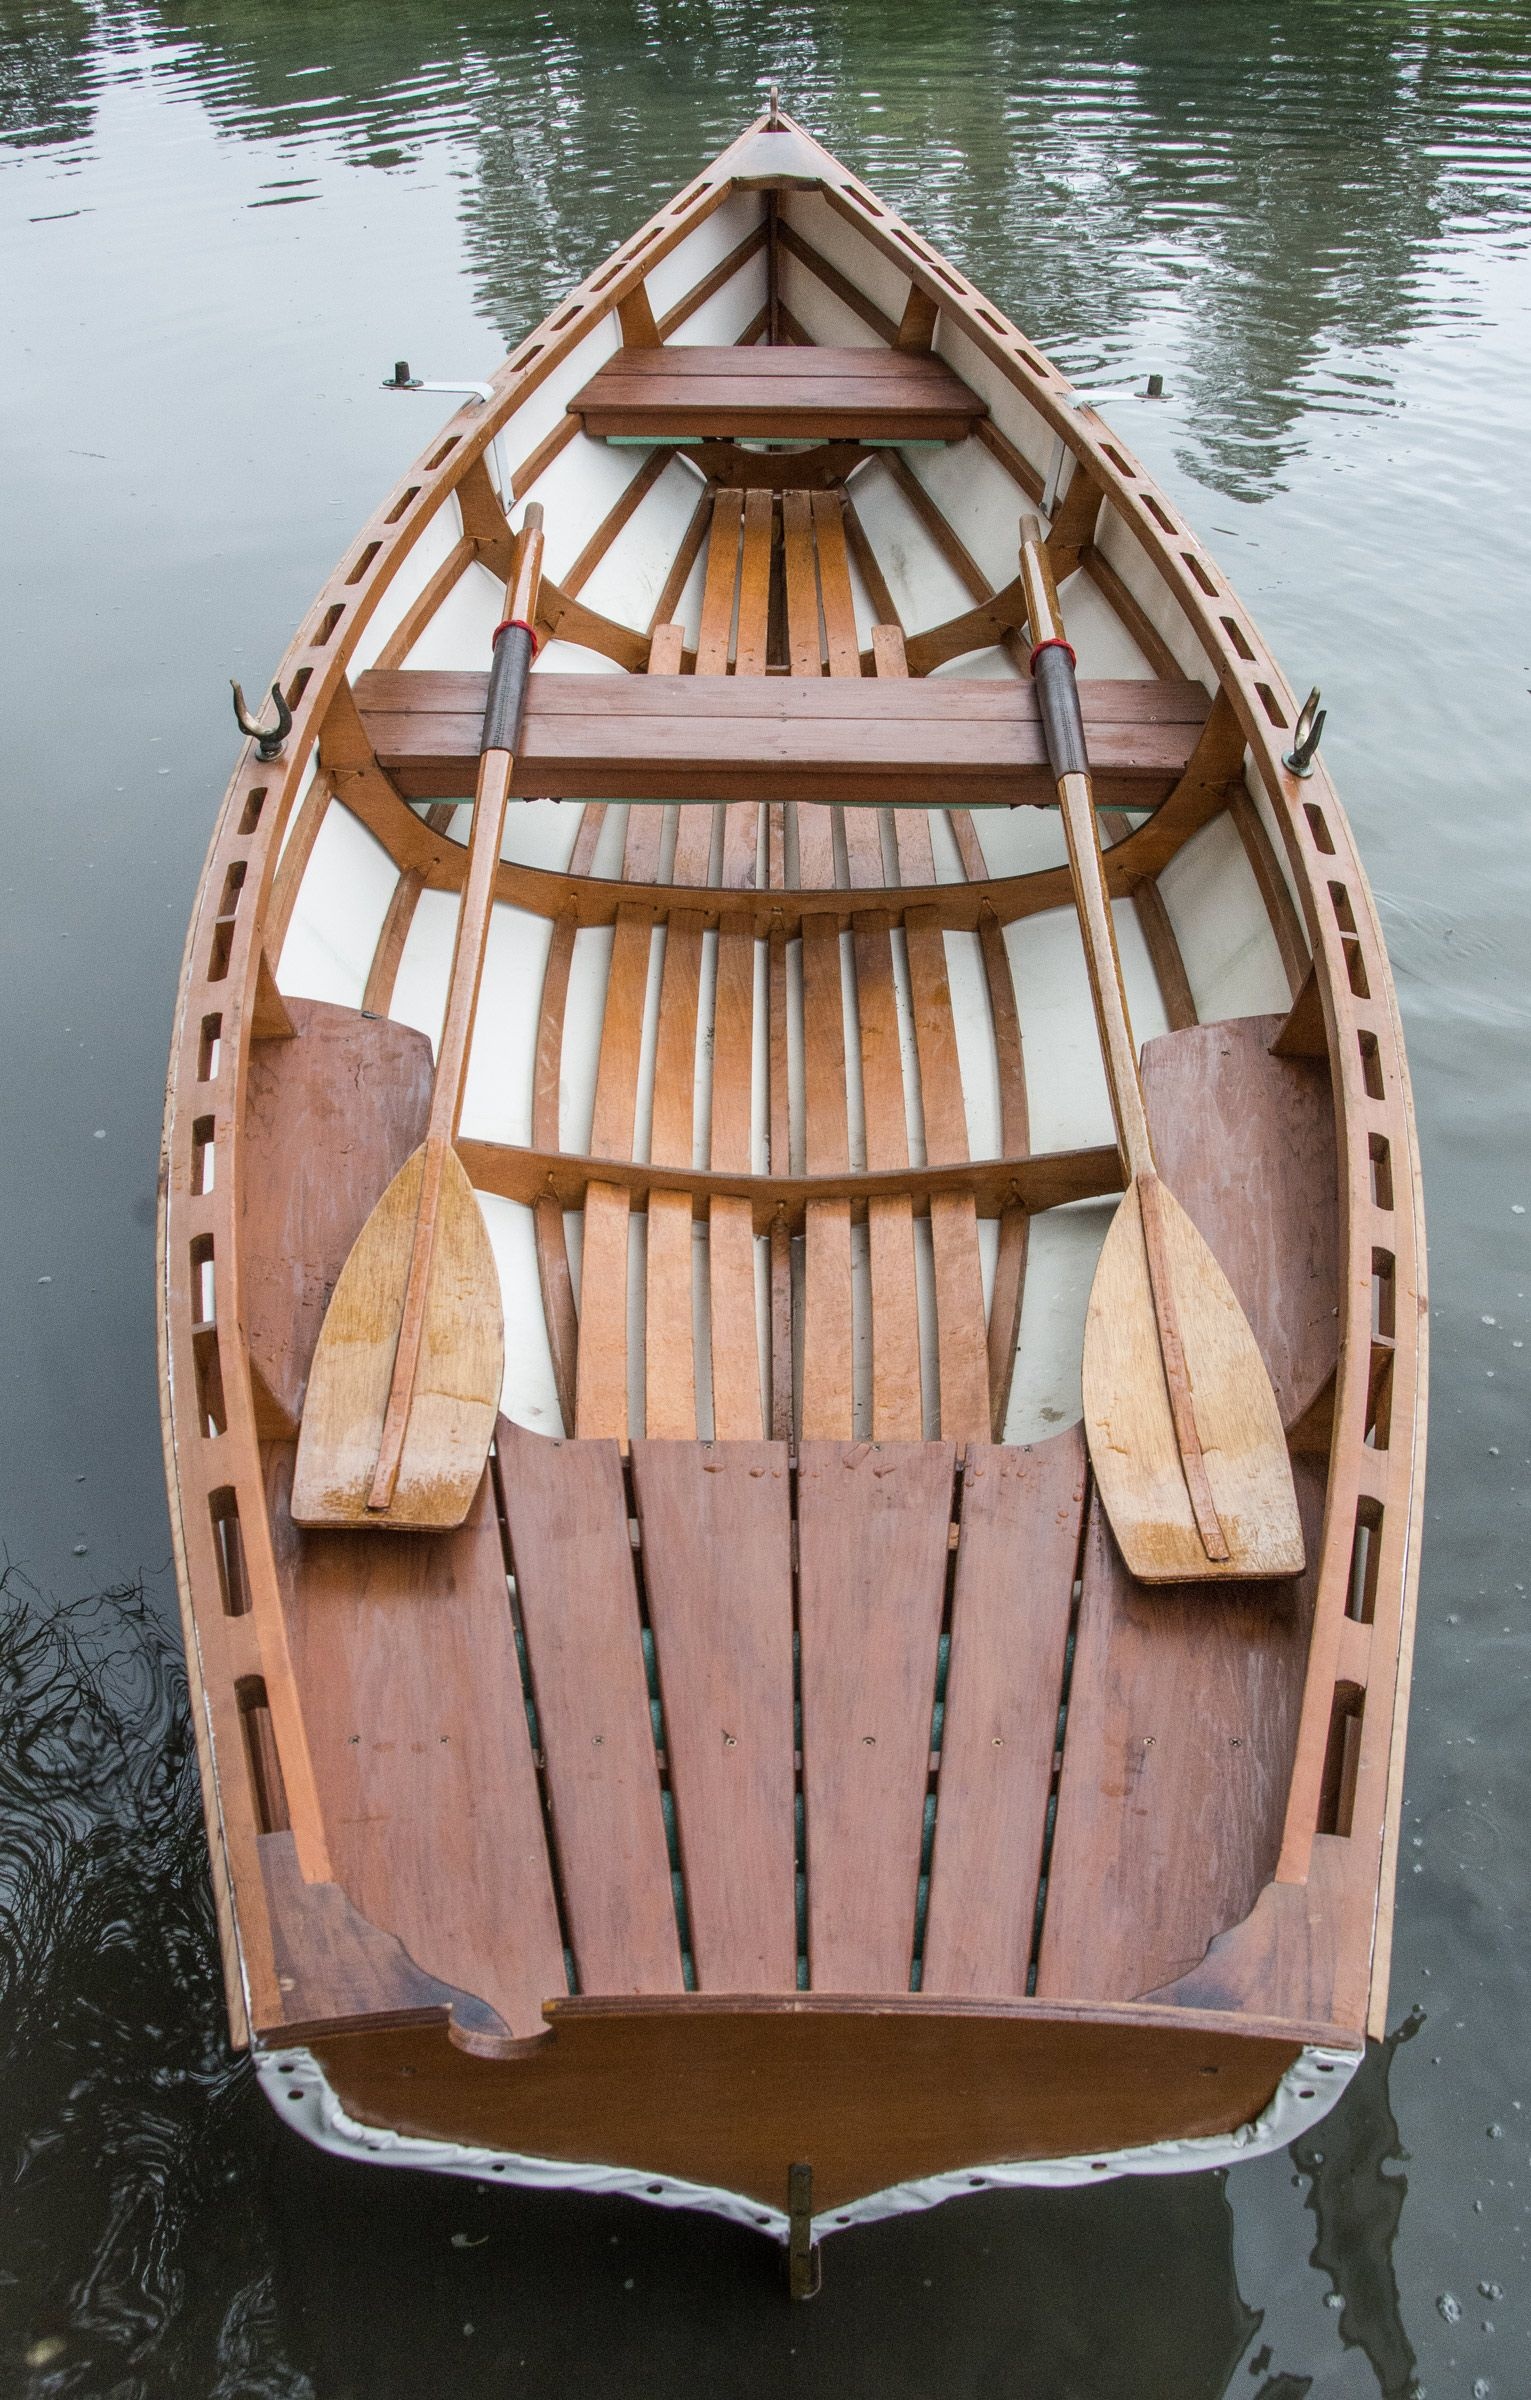 Rowing: A classic boat made of wood with two paddles, Equipment for recreational boating. 1540x2400 HD Wallpaper.